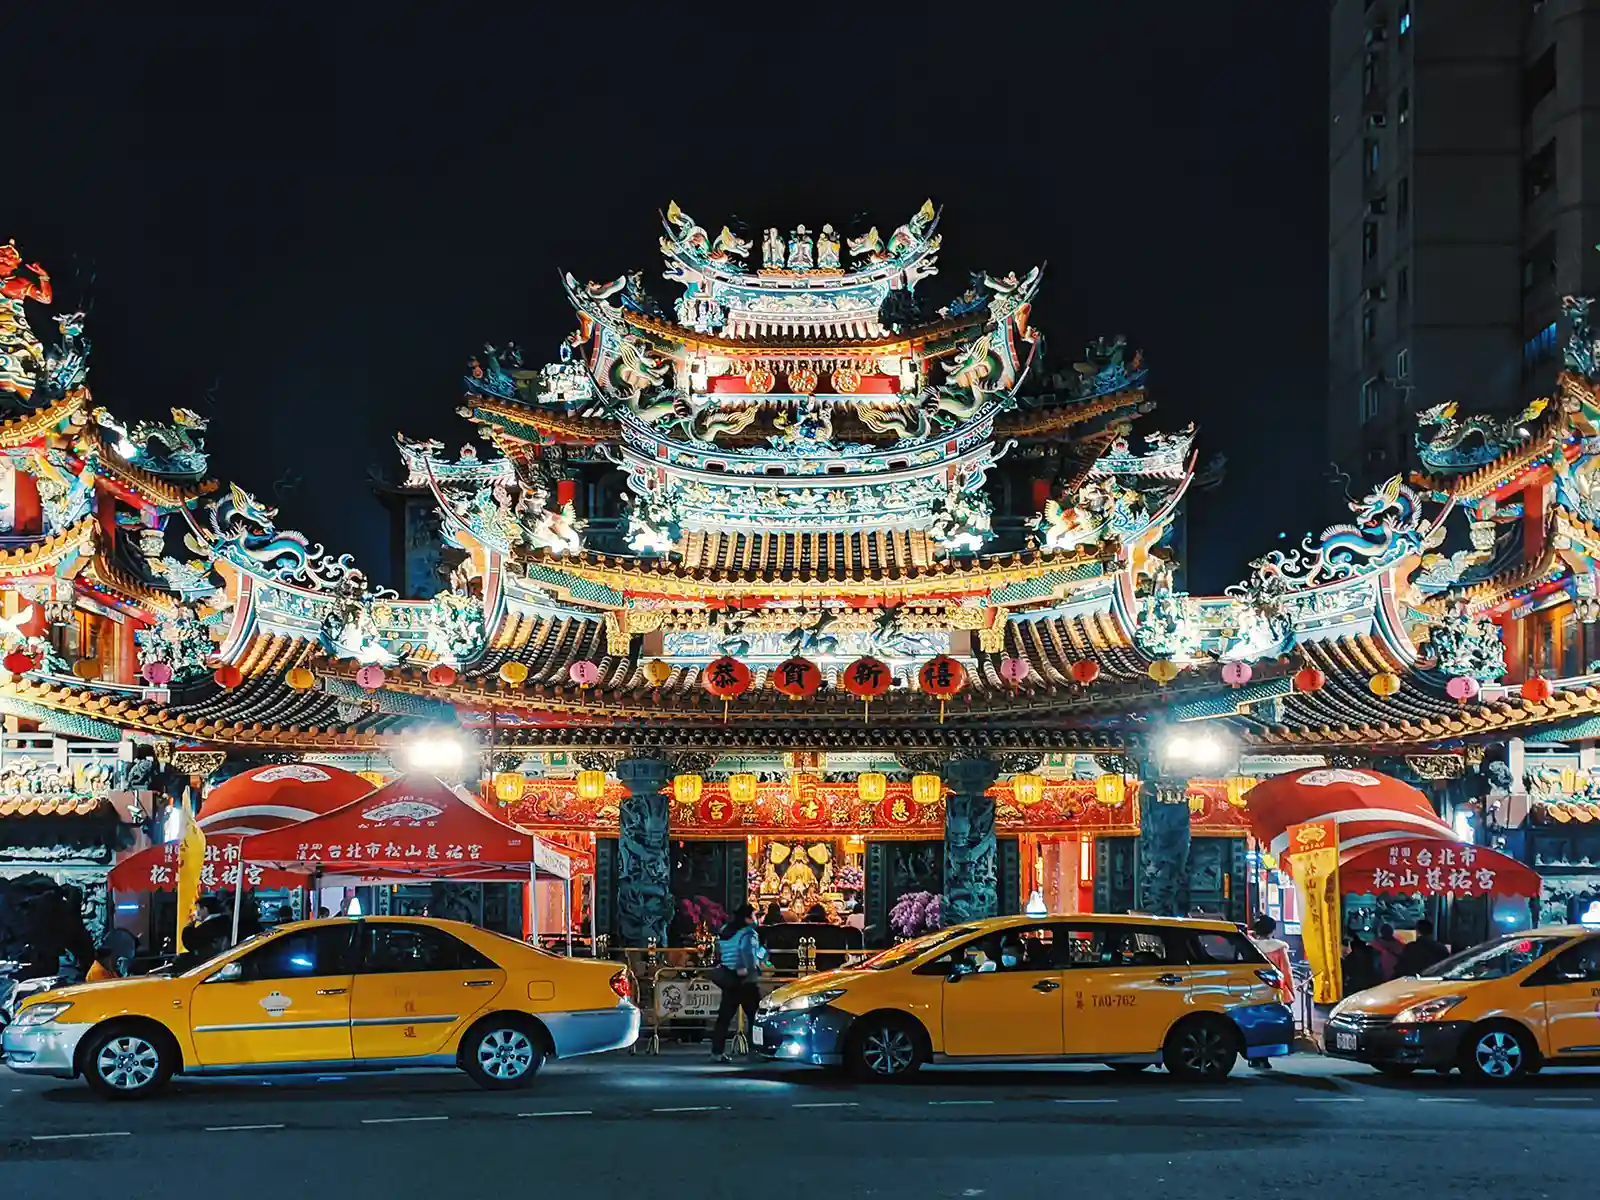 Several taxis are parked in front of an ornately decorated temple.